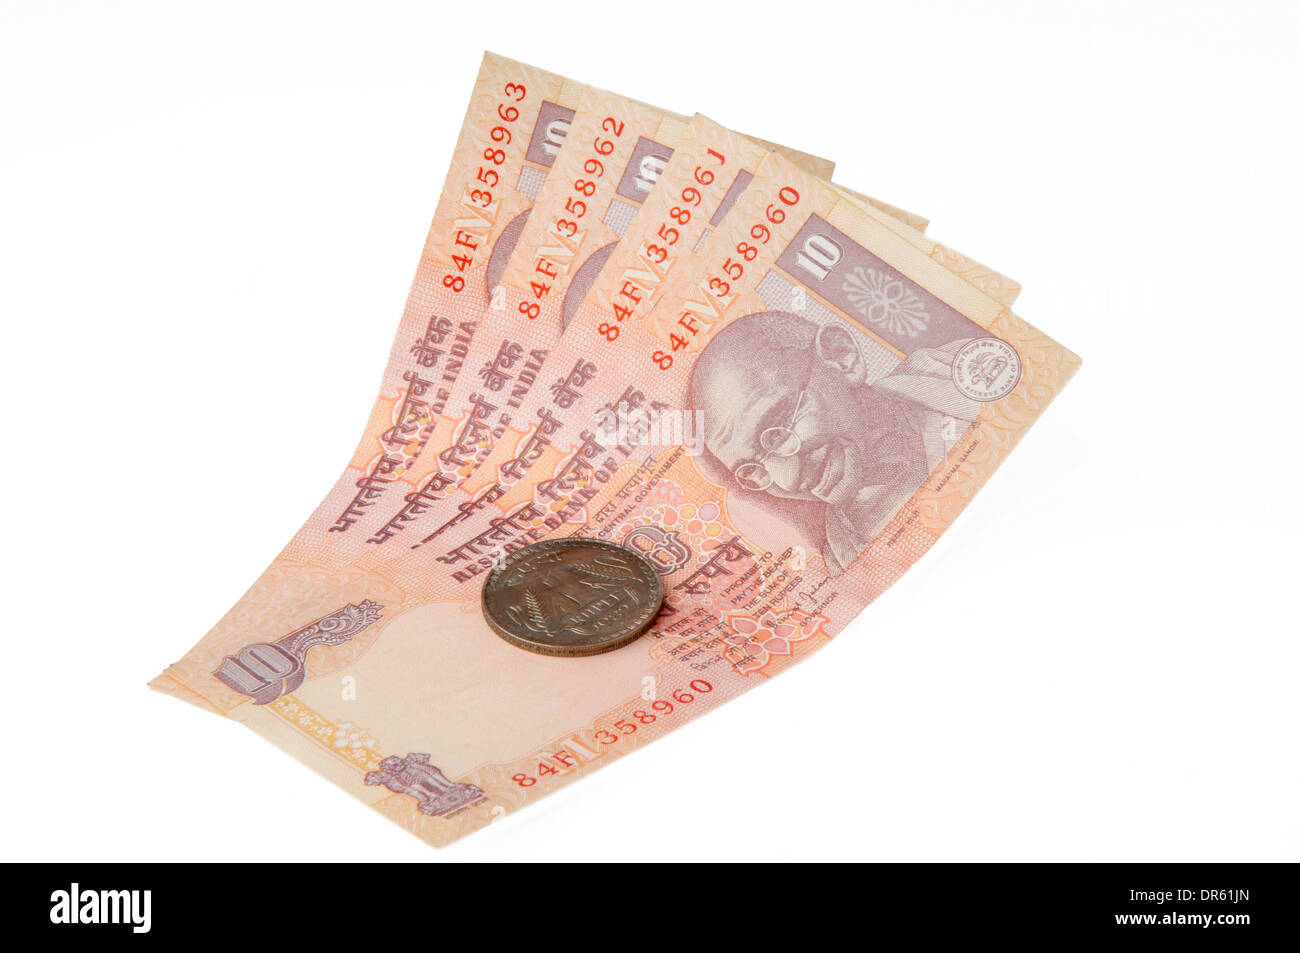 A ten rupee notes and One rupee coin ,Indian Currency Stock Photo